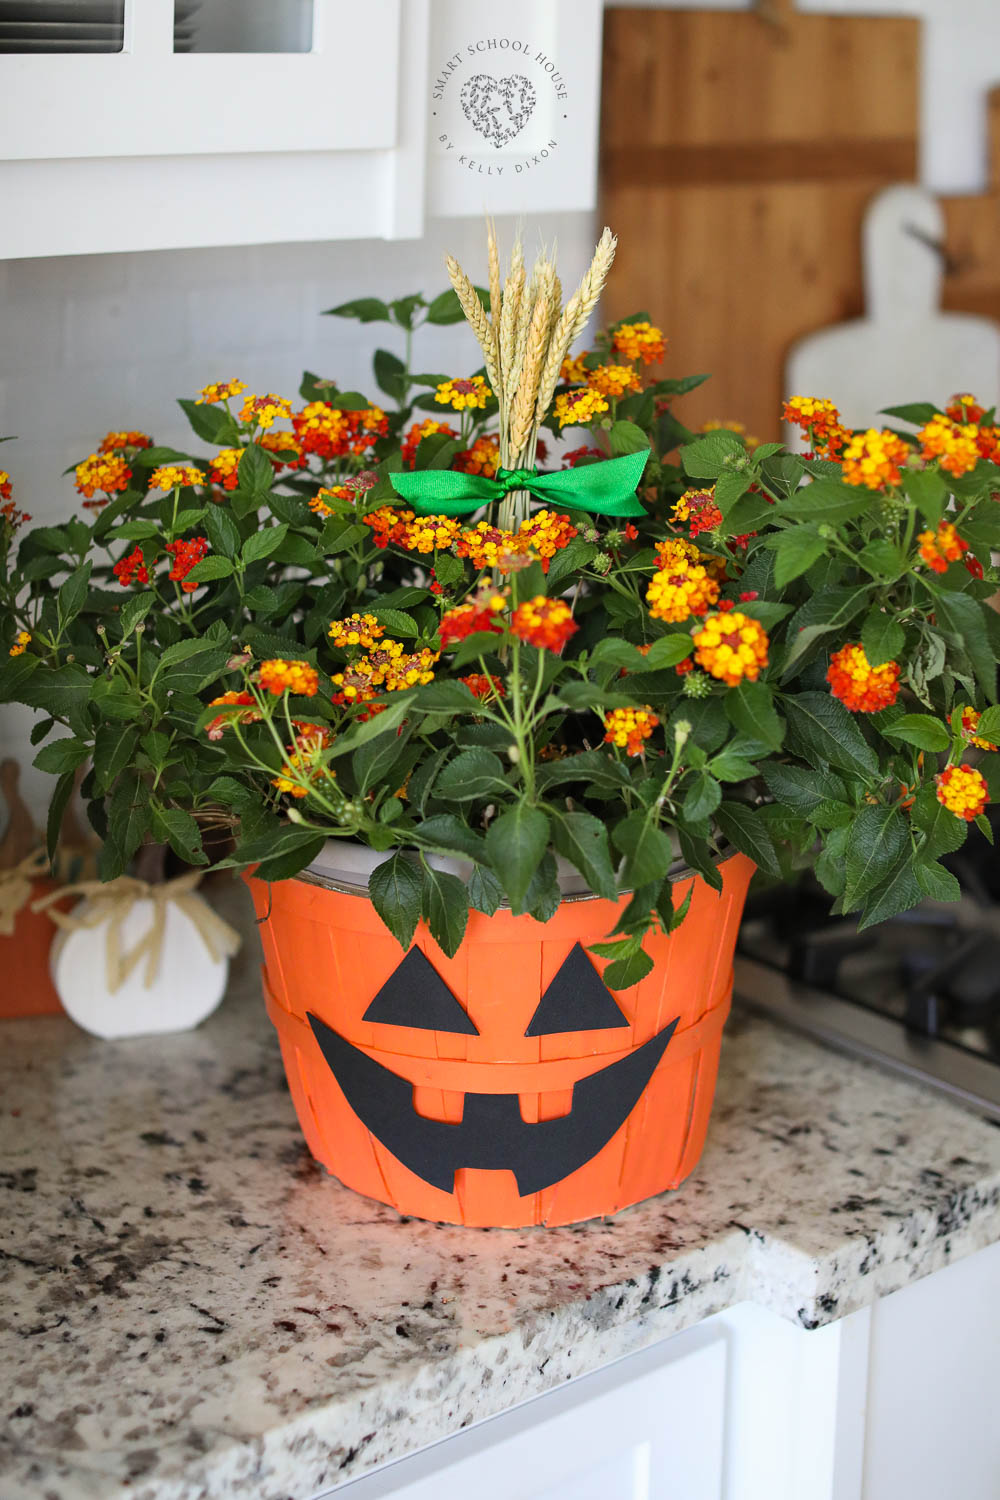 DIY Halloween Pumpkin Planter with orange flowers and glowing lights! How to make a Jack-O-Lantern planter basket with this fall craft idea!